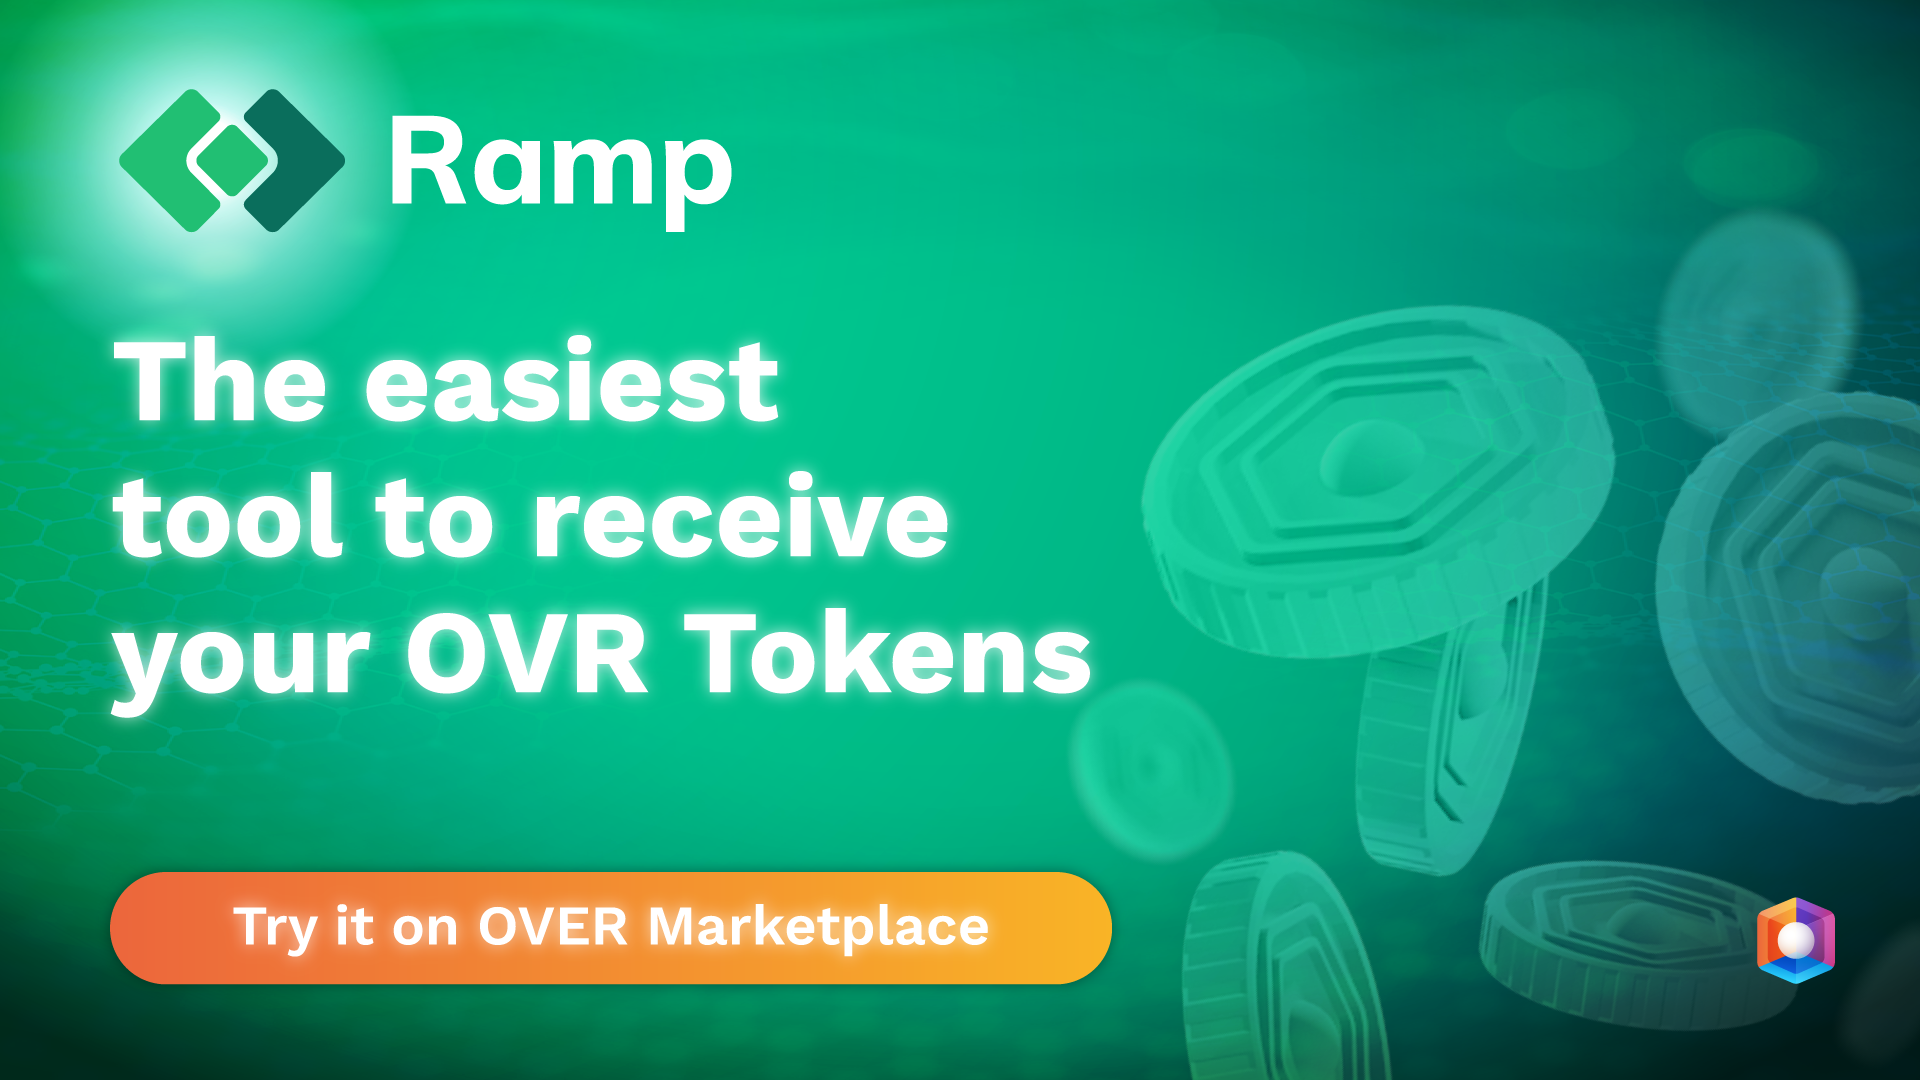 Buying OVR Tokens Just Got Easier with RAMP